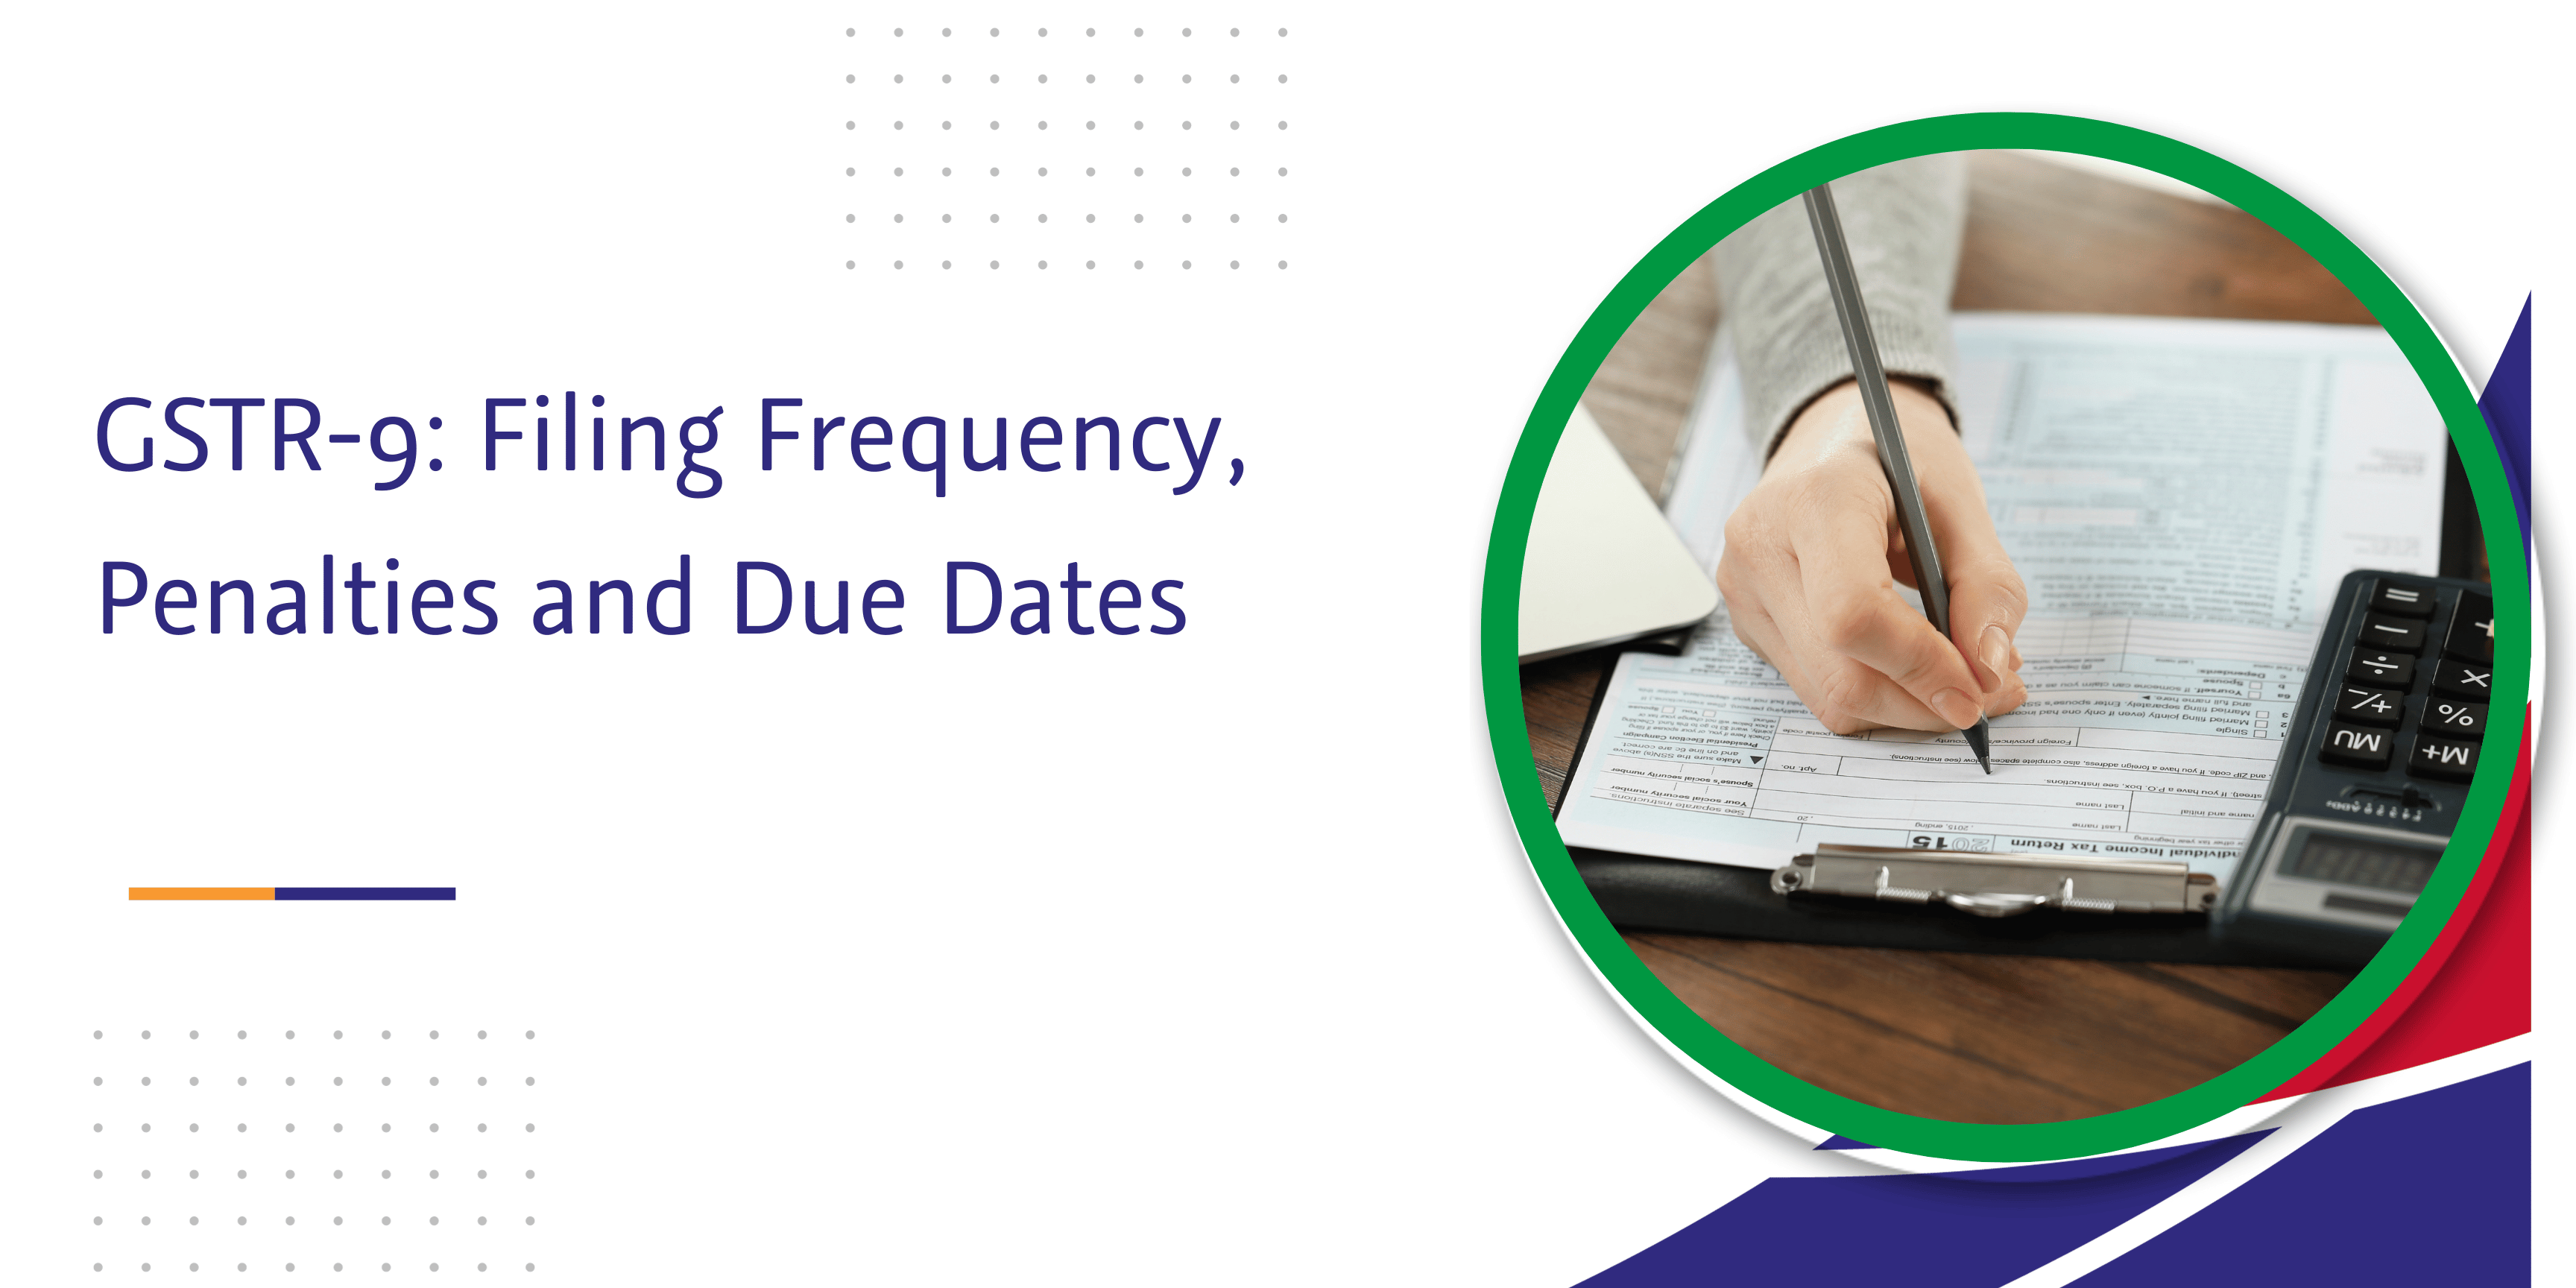 You are currently viewing GSTR-9: Filing Frequency, Penalties and Due Dates